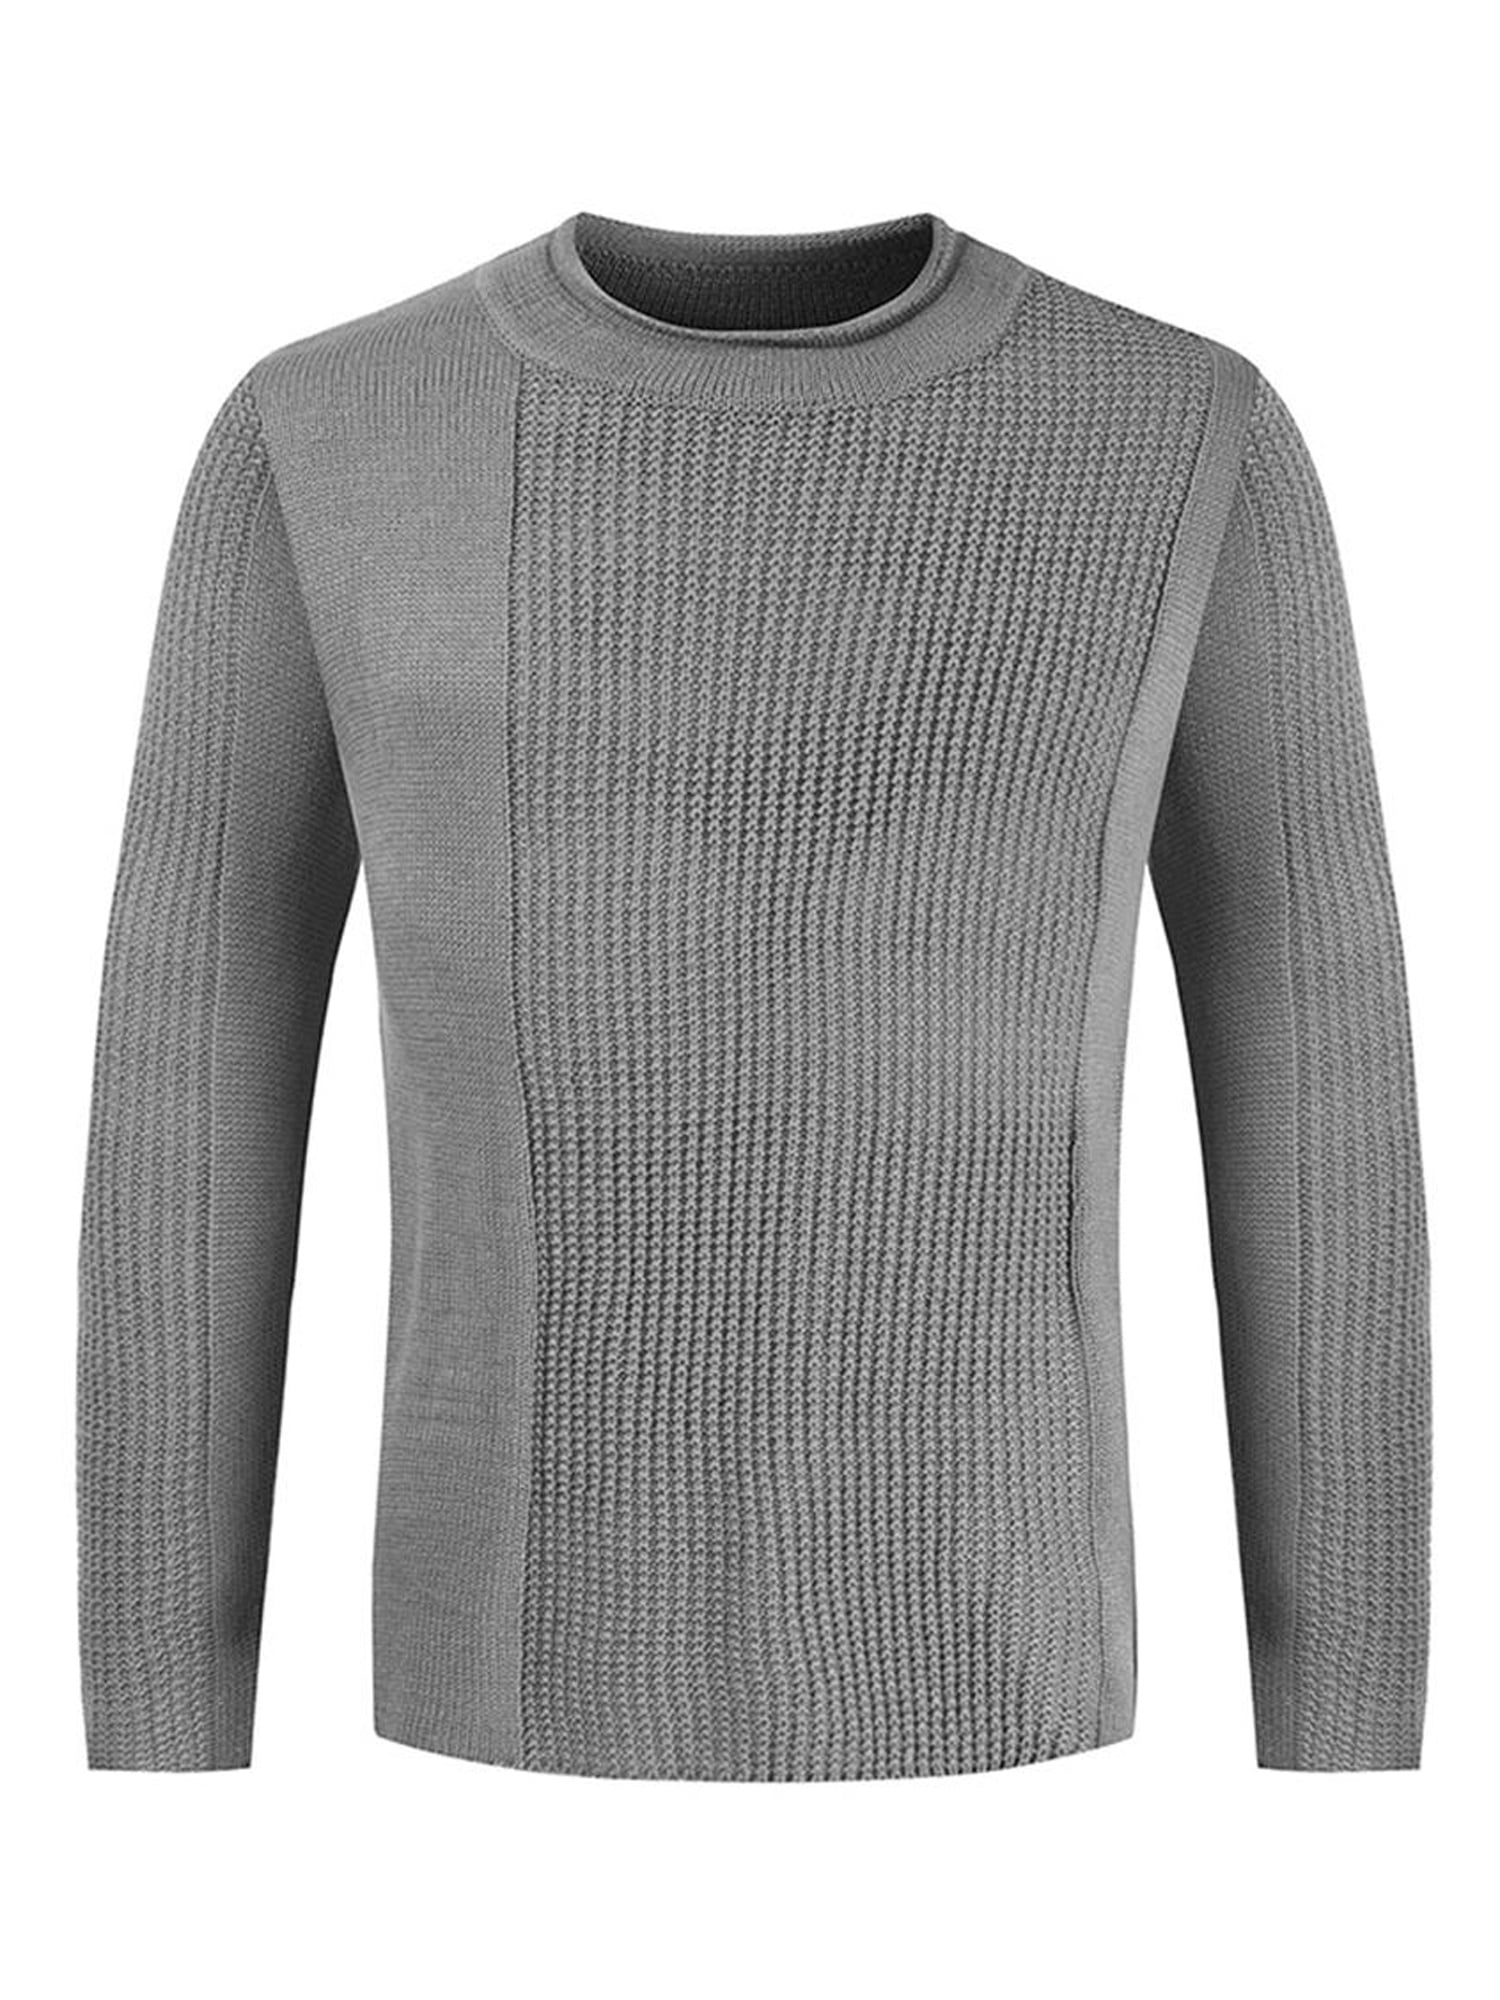 Lightweight Sweater Clothing Mens Clothing Jumpers Pullover Jumpers Long Sleeve Shirt Fall Winter Basic Top Natural Flax Linen Sweater for Men Knit Pullover Men Clothing Gift for Him 